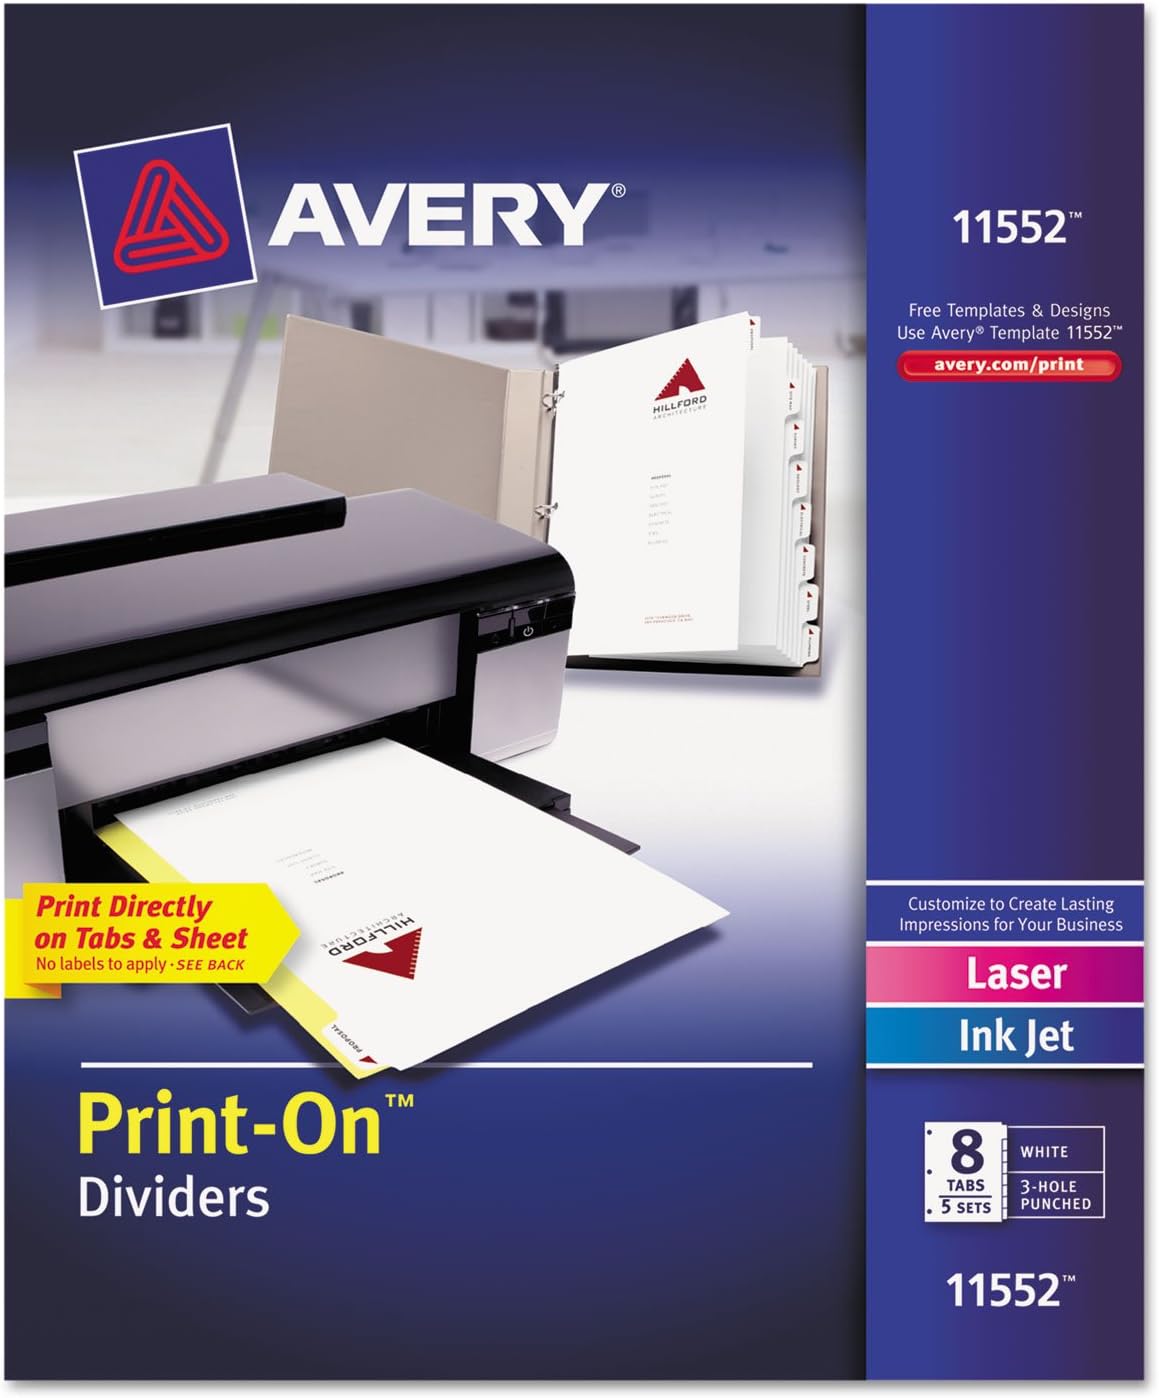 DIVIDERS PRINT-ON 3-HOLE PUNCH